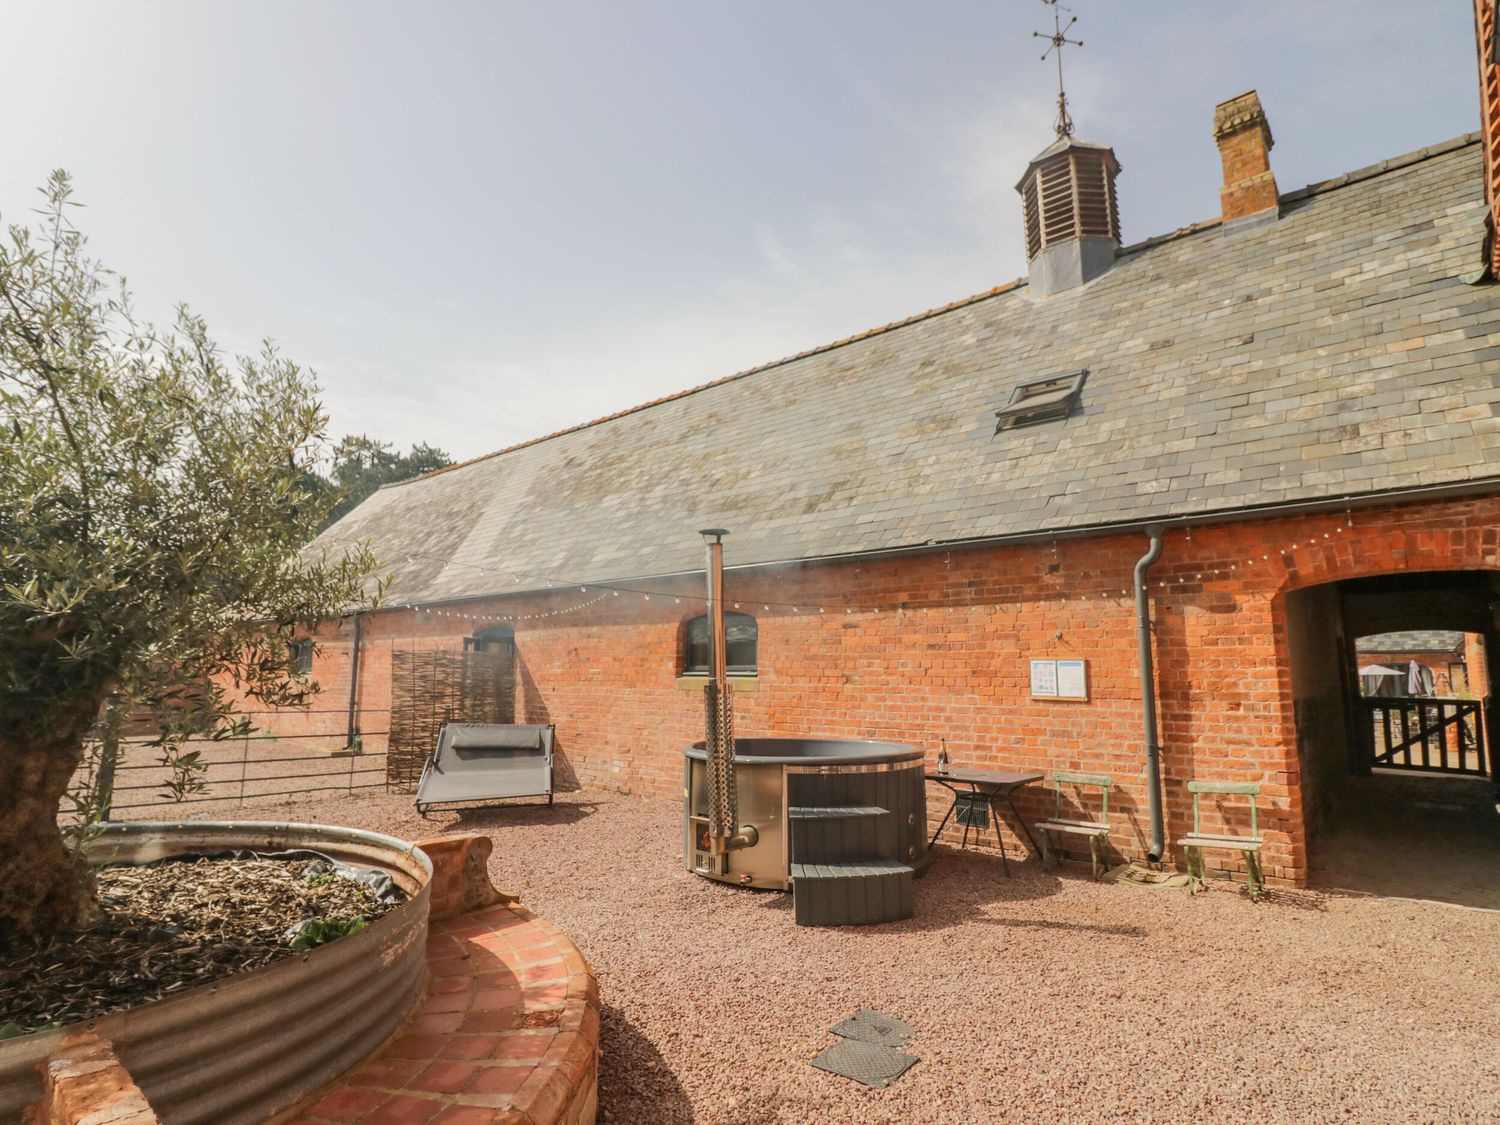 Plough Share, Huntley, Gloucestershire. Barn conversion. Contemporary. Wood-fired hot tub. Two pets.